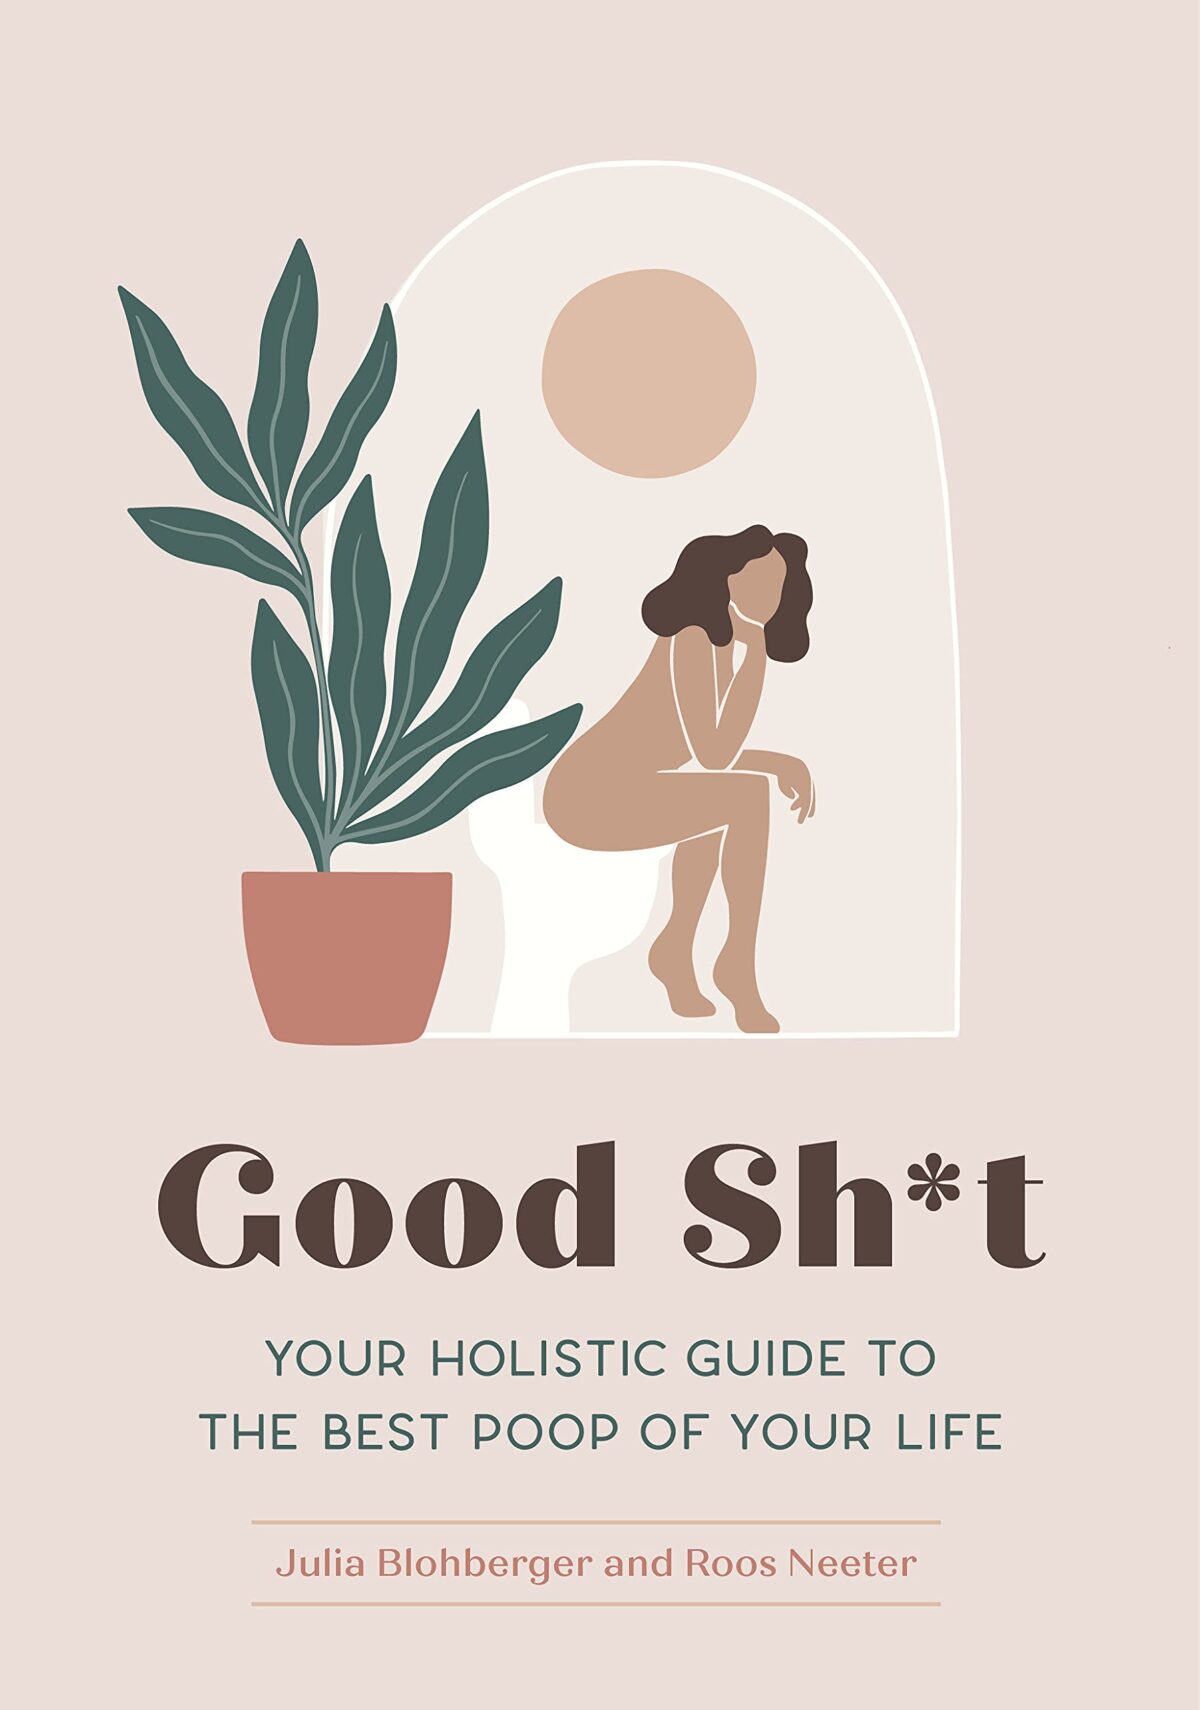 Good Sh*t: Your Holistic Guide to the Best Poop of Your Life (Feel Good)